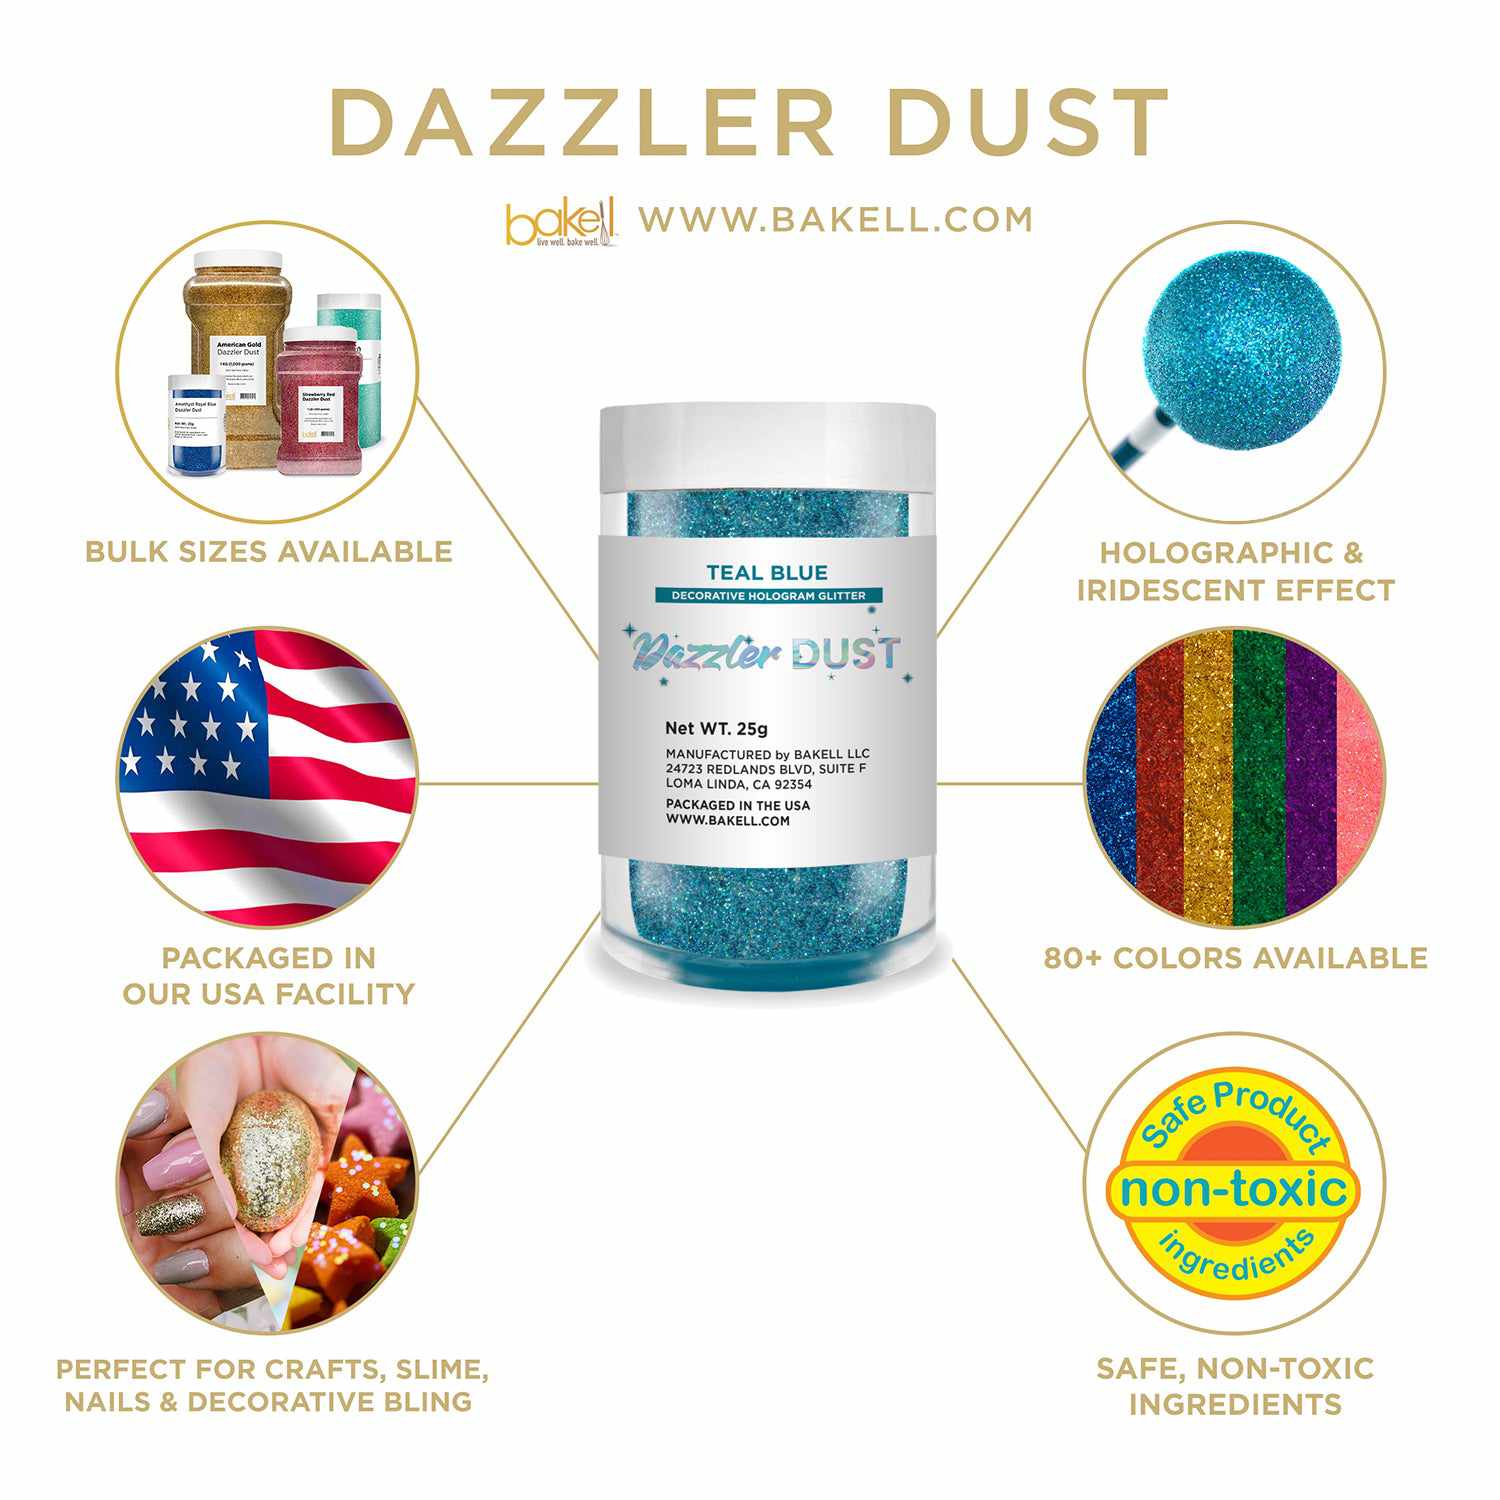 Dazzler Dust | Non Toxic Holographic Decorating & Craft Glitter | Bakell.com